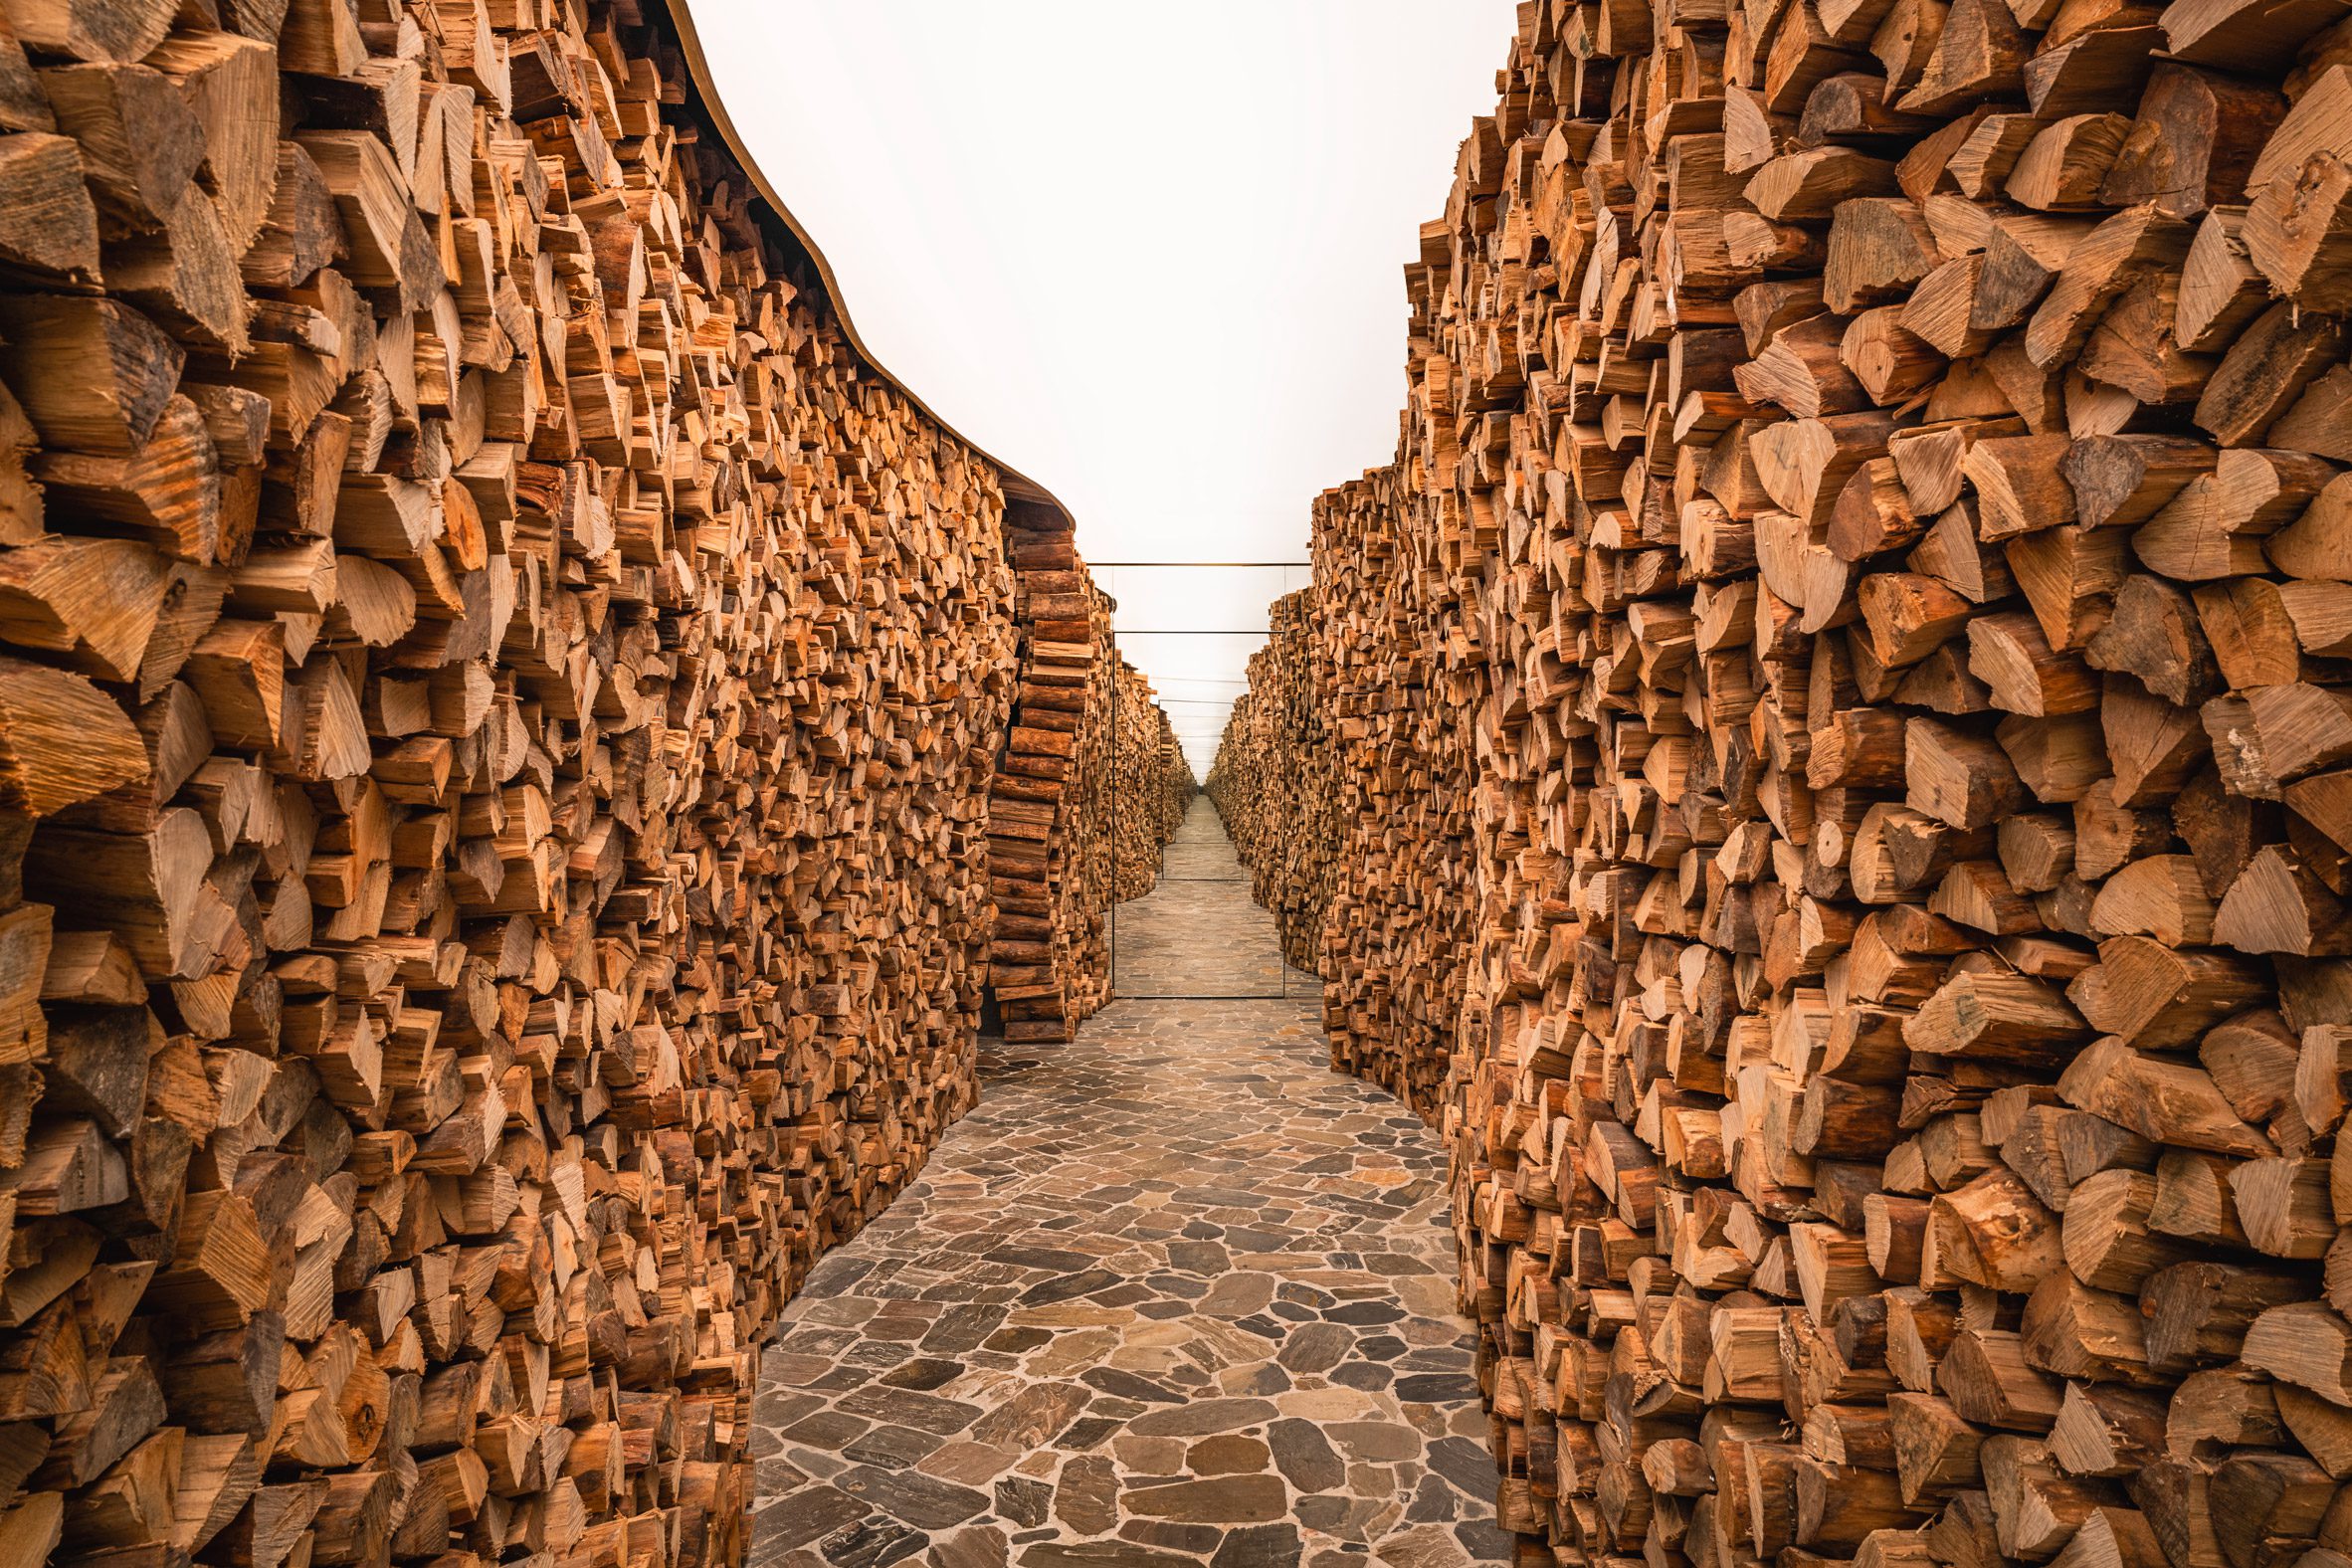 Firewood-lined entrance